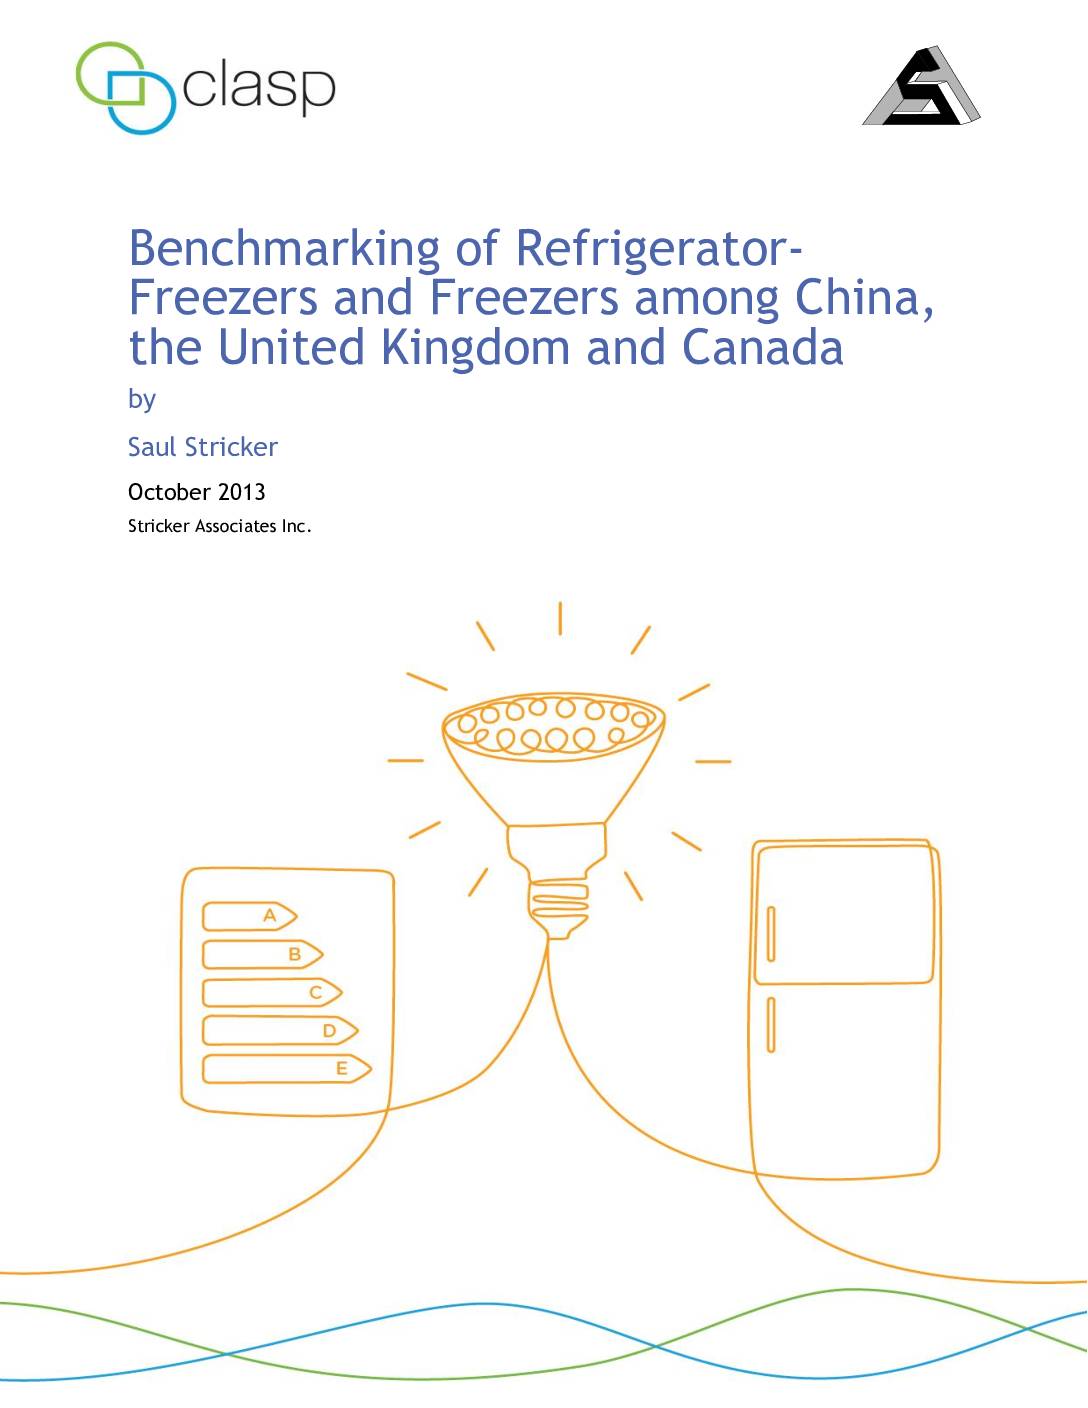 Benchmarking of RefrigeratorFreezers and Freezers among China, the United Kingdom and Canada